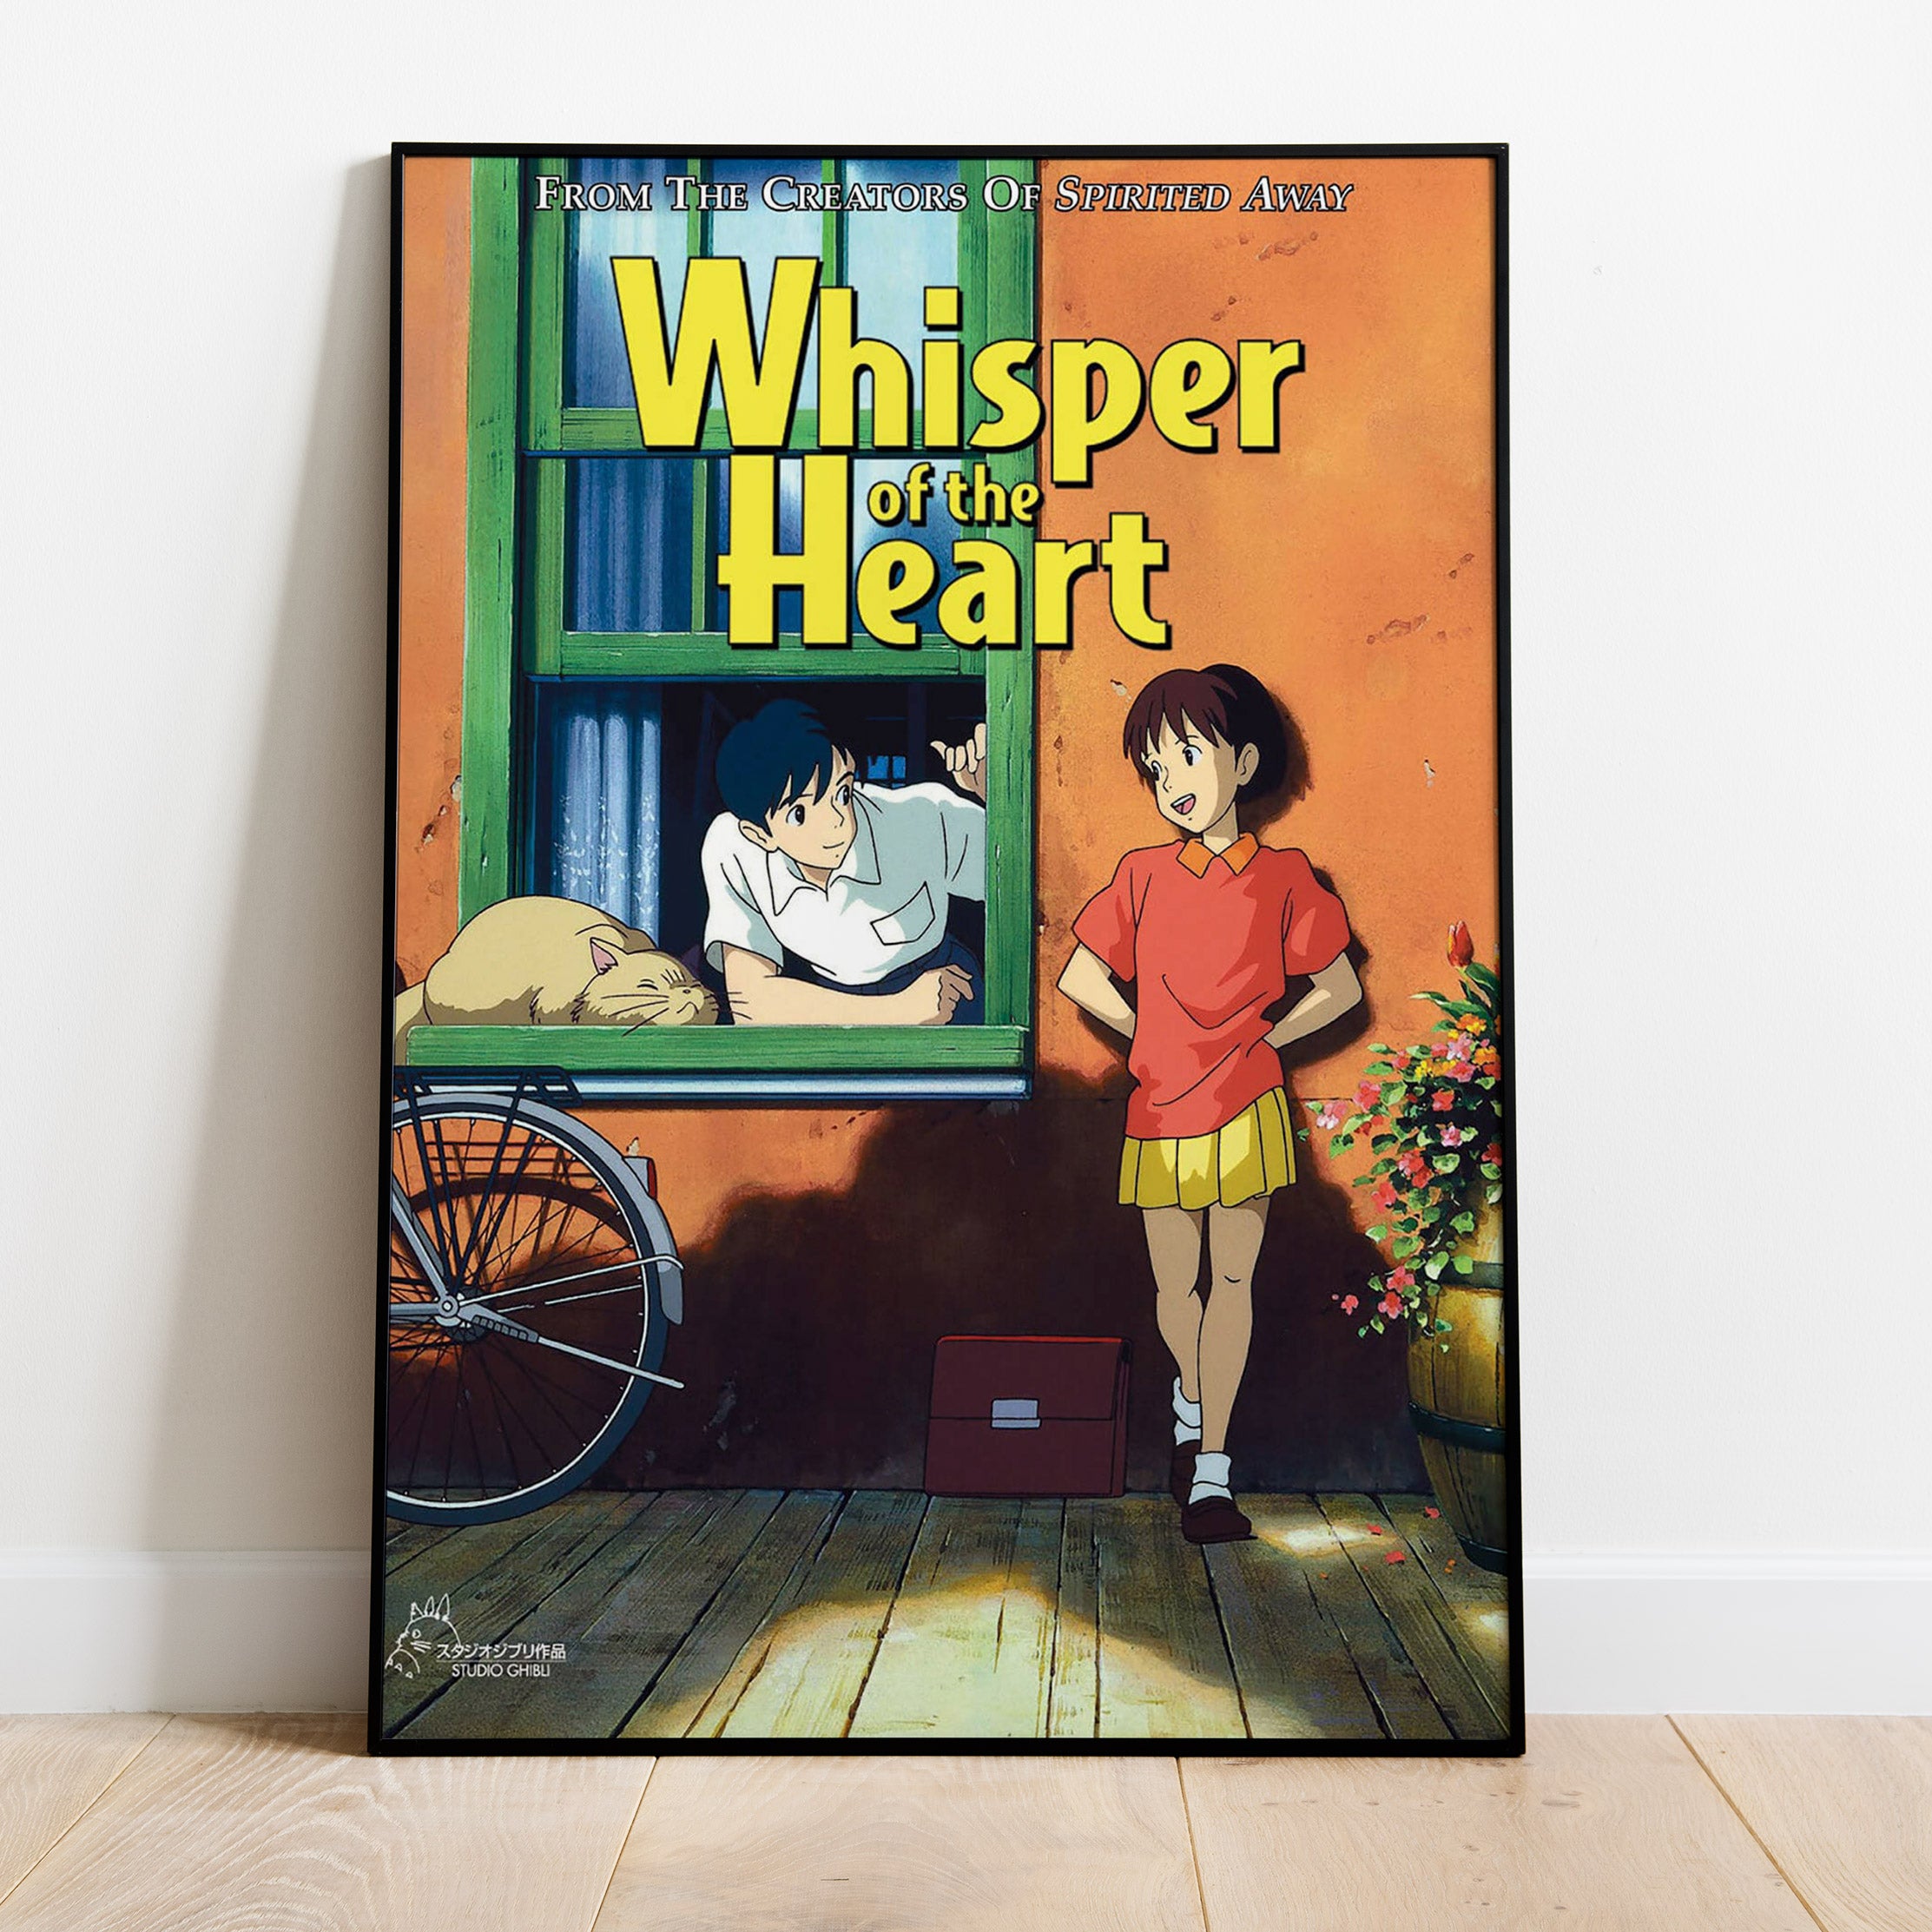 Whisper Of The Heart - Studio Ghibli Japanaese Animated Movie Poster -  Posters by Studio Ghibli, Buy Posters, Frames, Canvas & Digital Art Prints